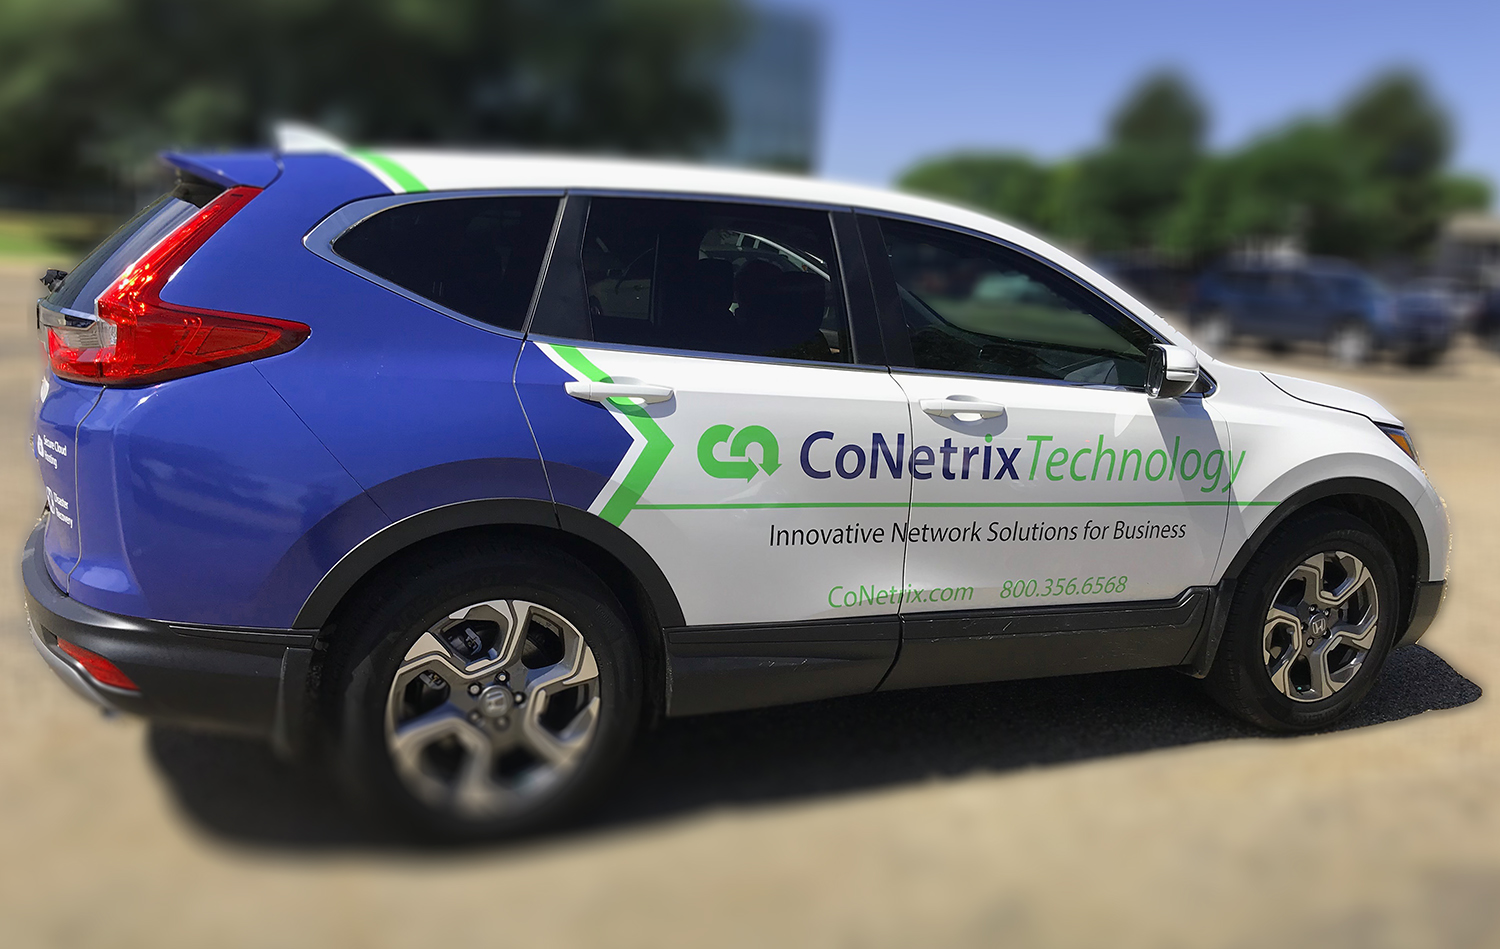 CoNetrix Technology is now in Midland, Texas